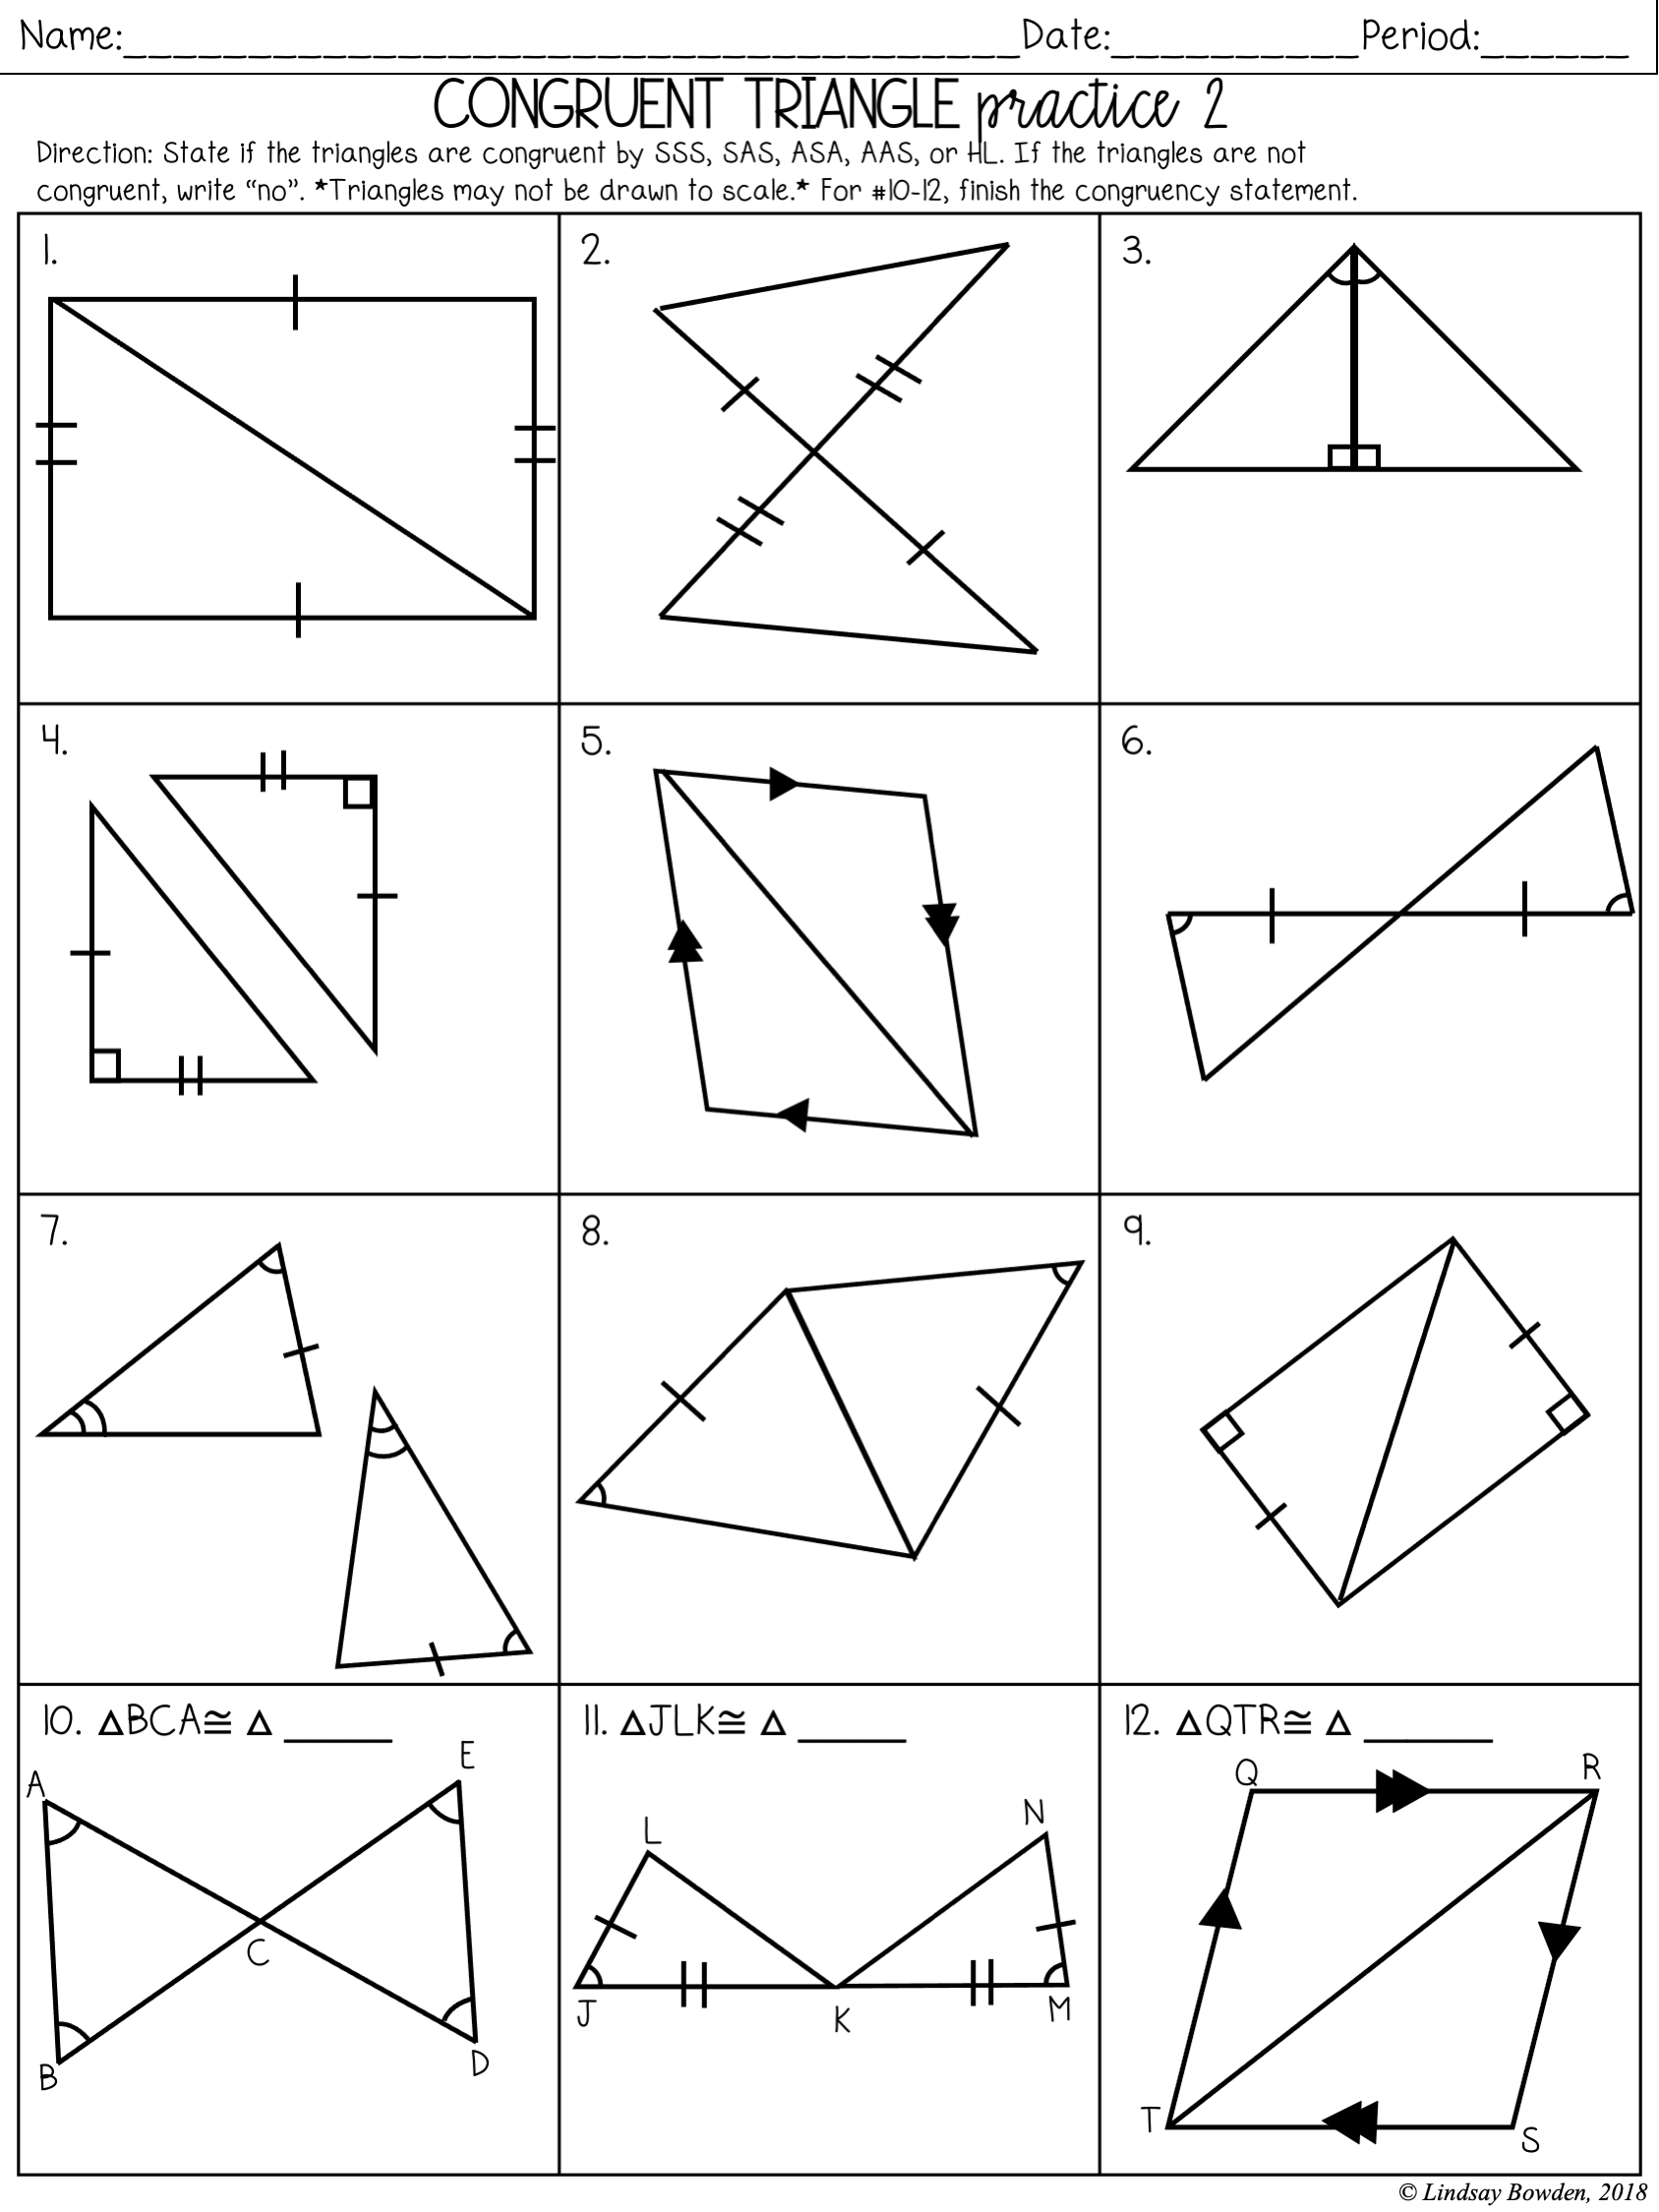 Congruent Triangles Notes and Worksheets - Lindsay Bowden With Regard To Triangle Proofs Worksheet Answers